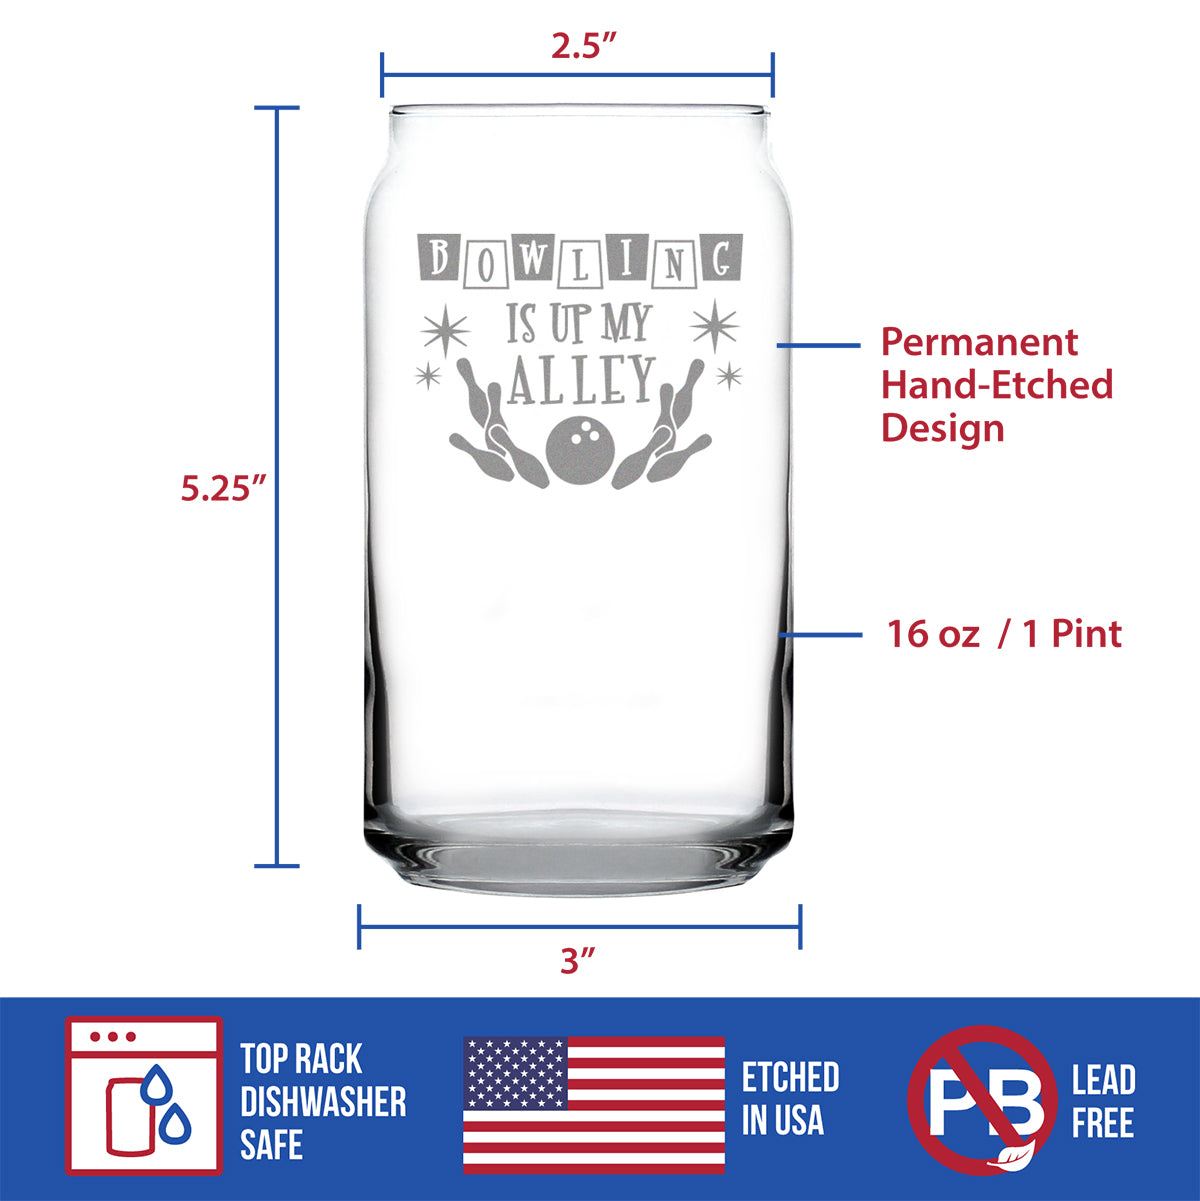 Bowling Is Up My Alley - Beer Can Pint Glass - Funny Bowling Themed Gifts and Decor for Bowlers - 16 oz Glass